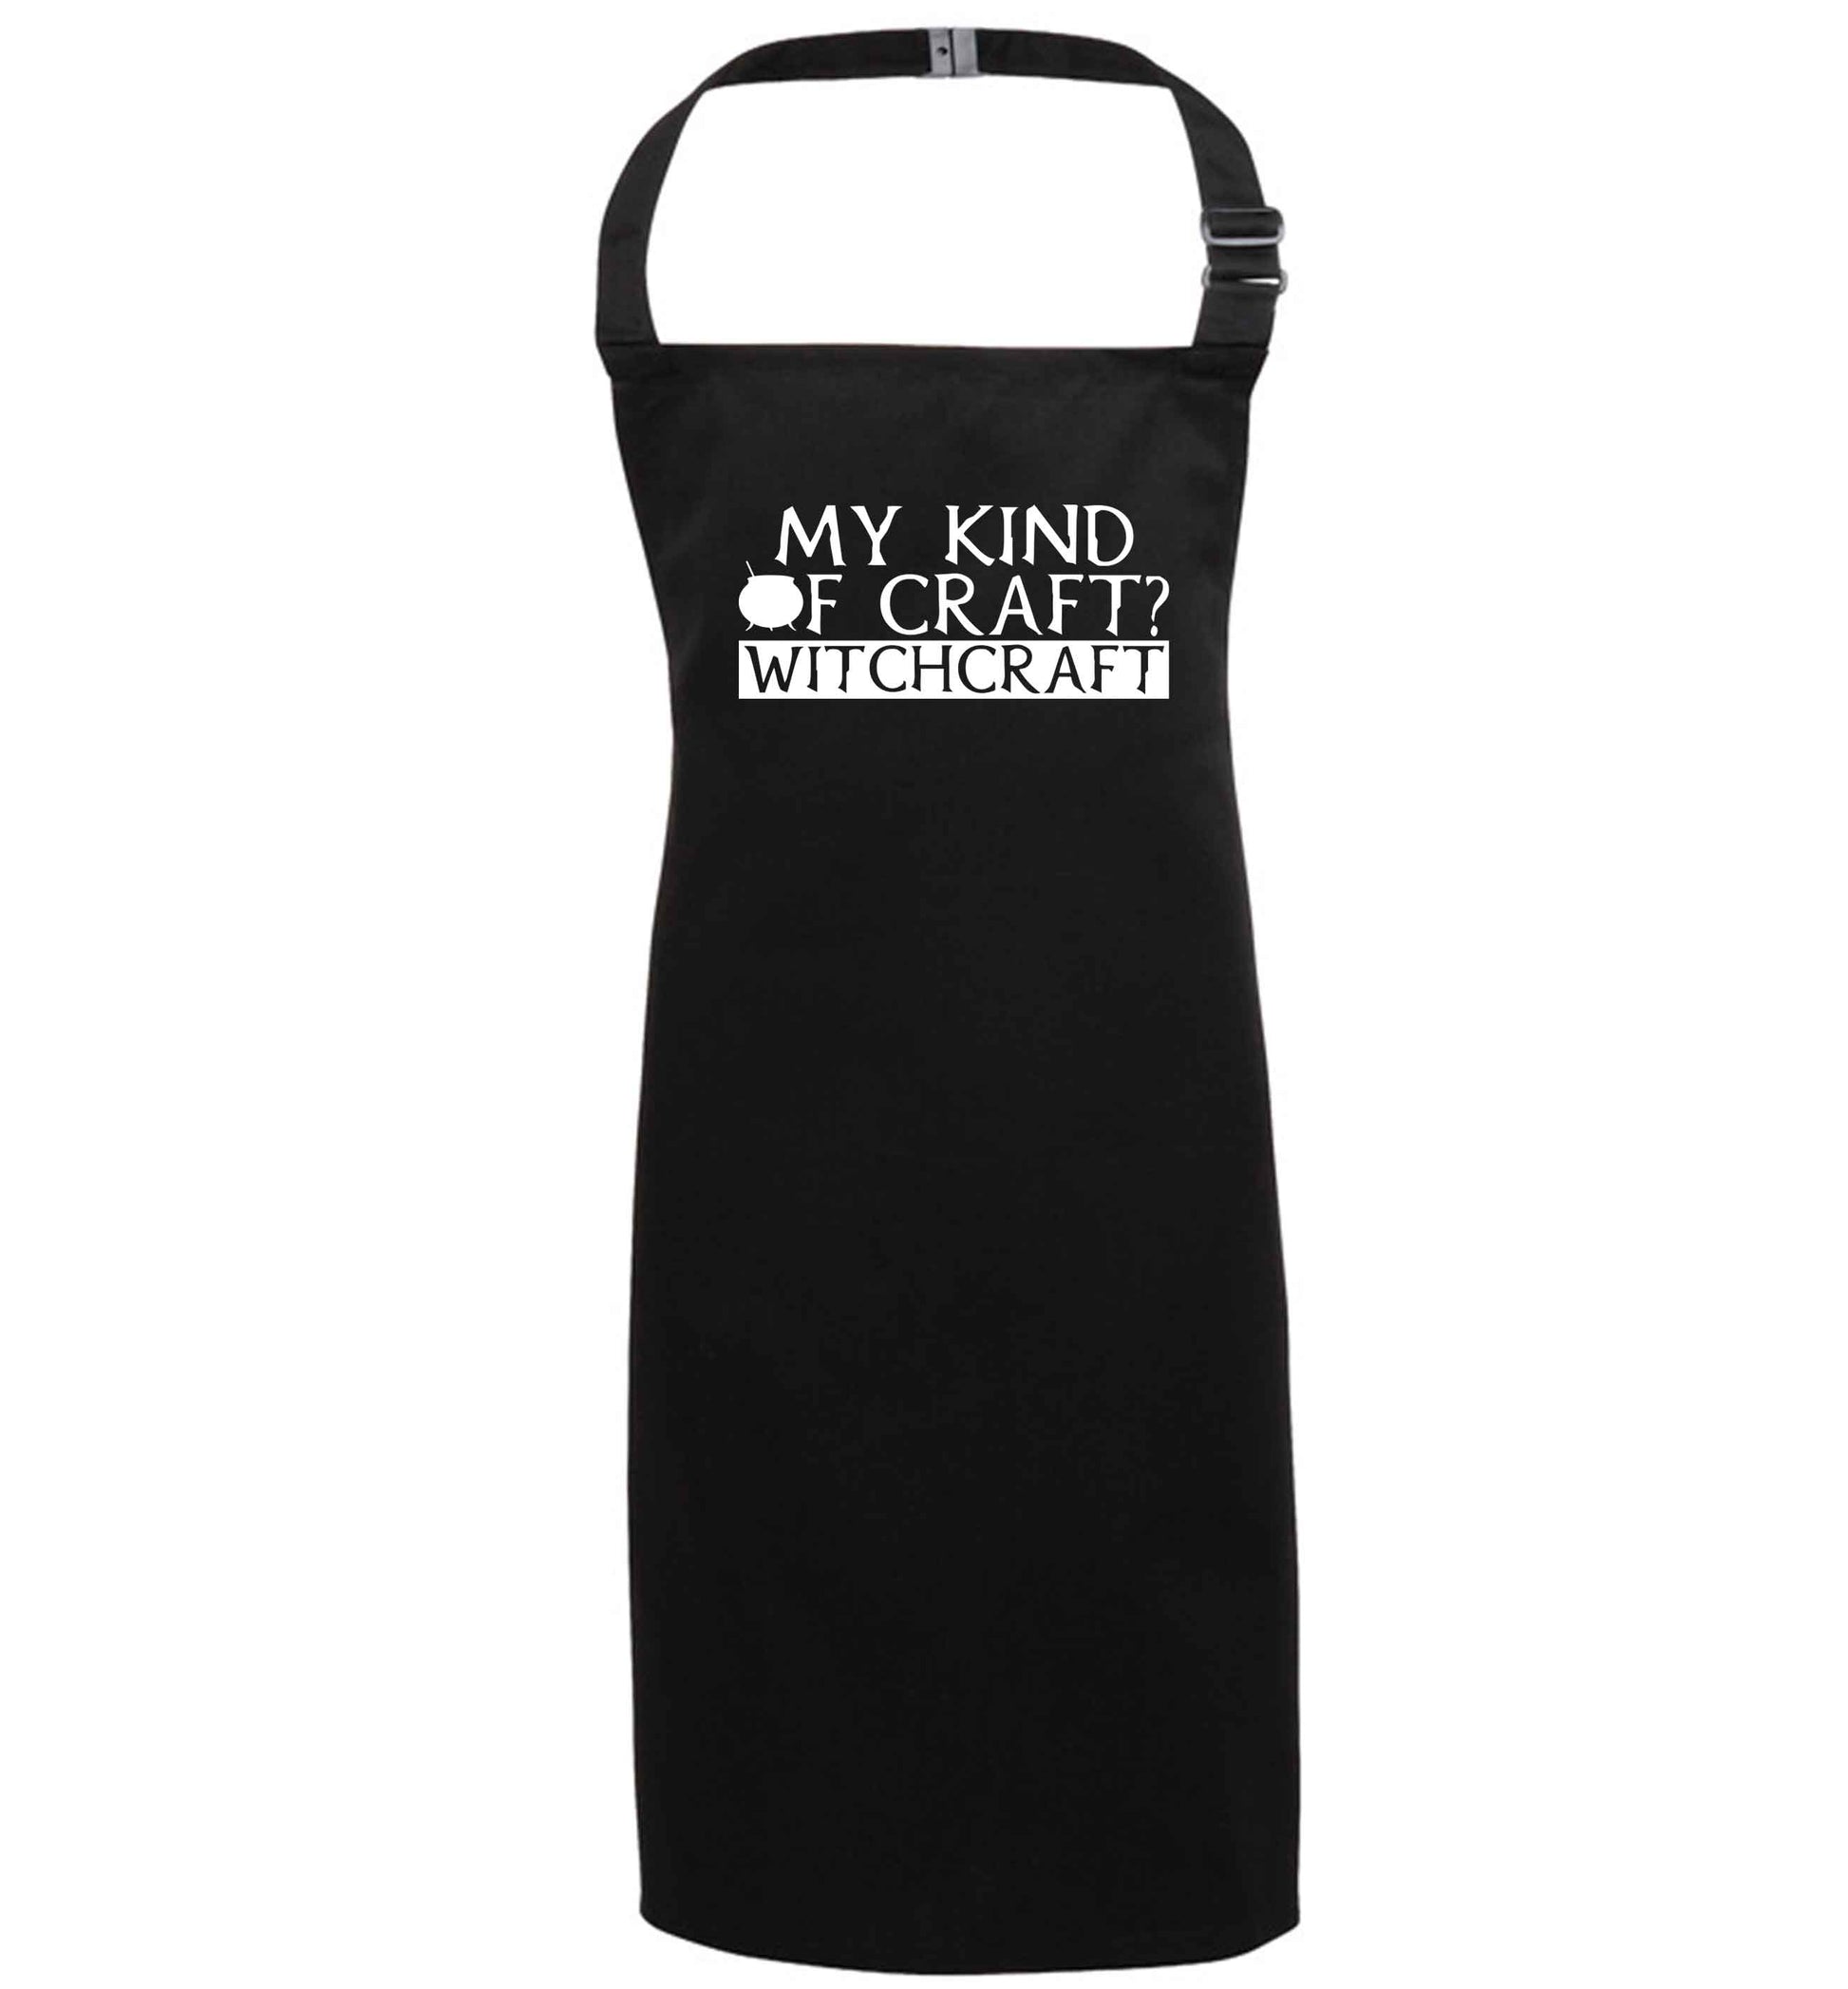 My king of craft? witchcraft  black apron 7-10 years